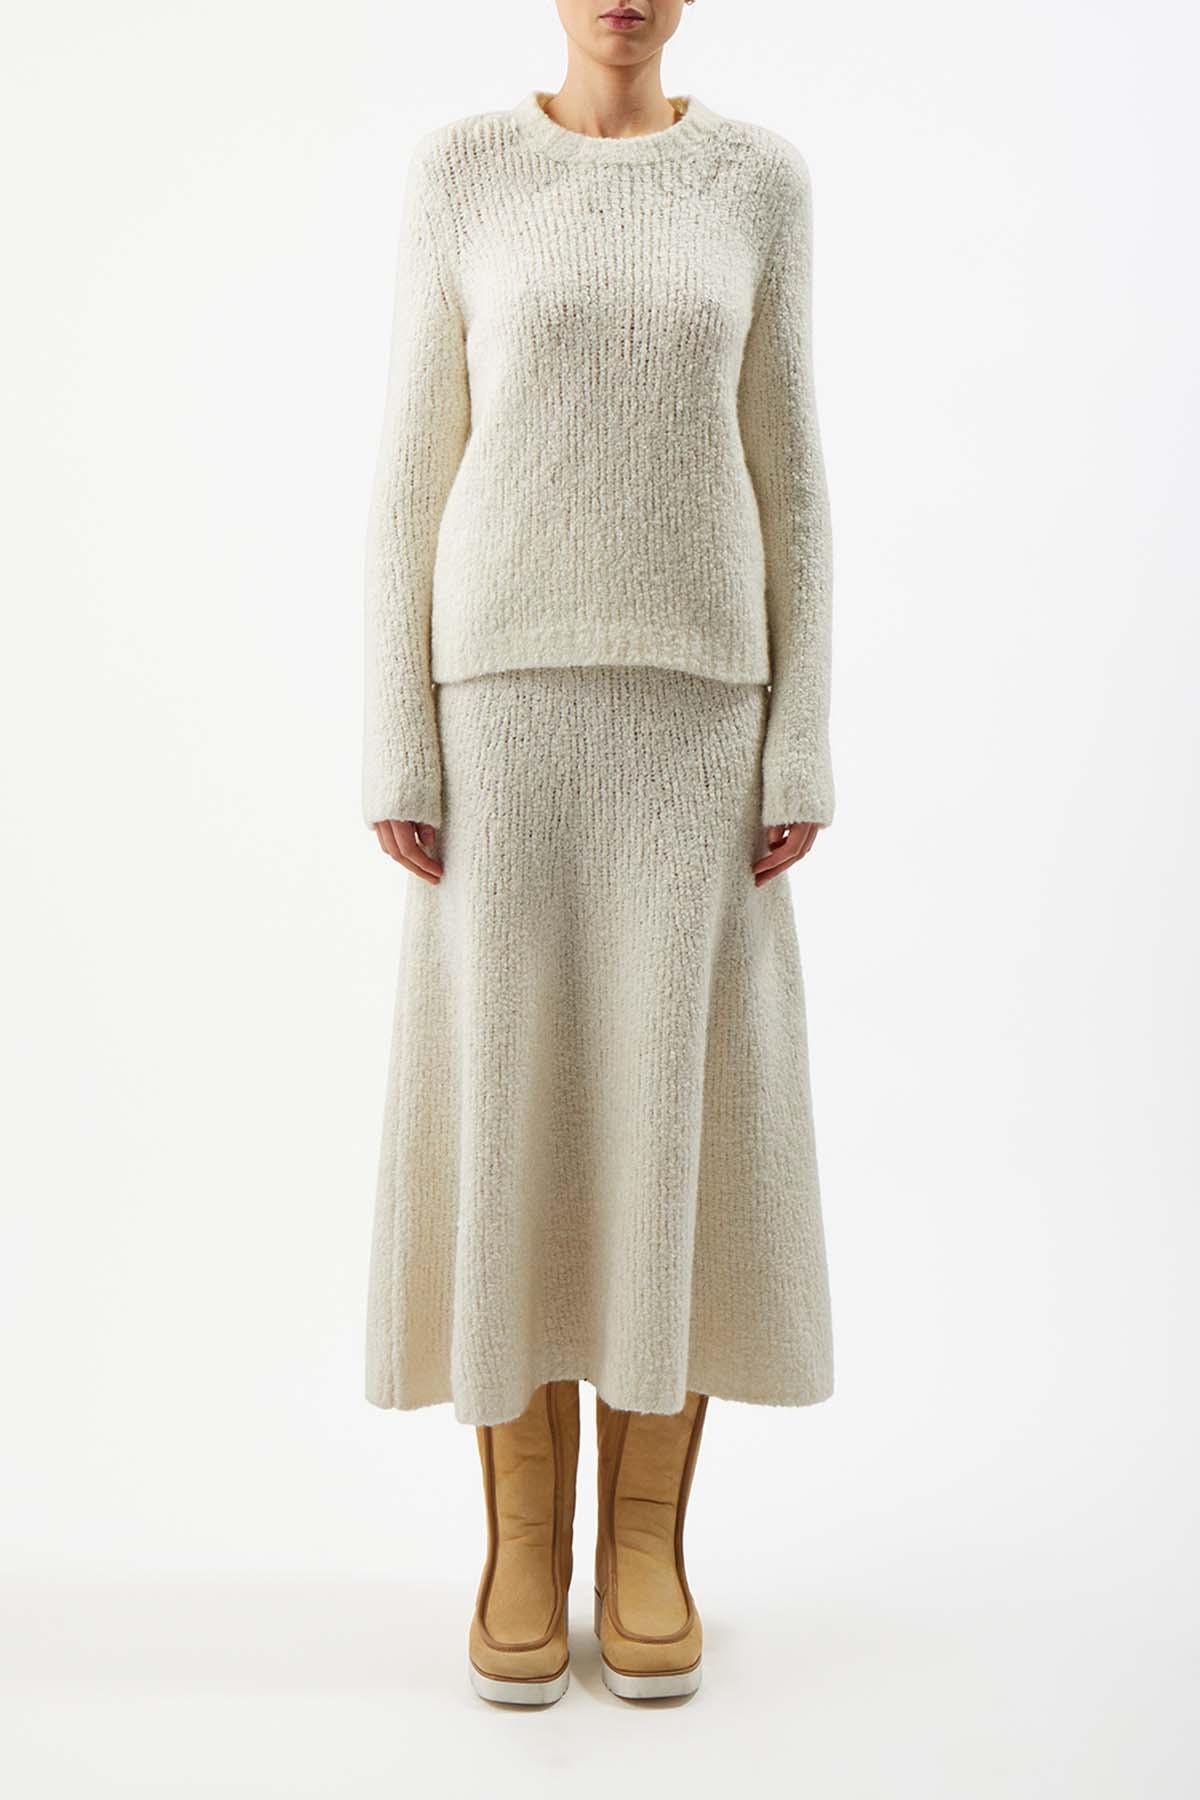 Pablo Skirt in Ivory Cashmere Boucle - 3